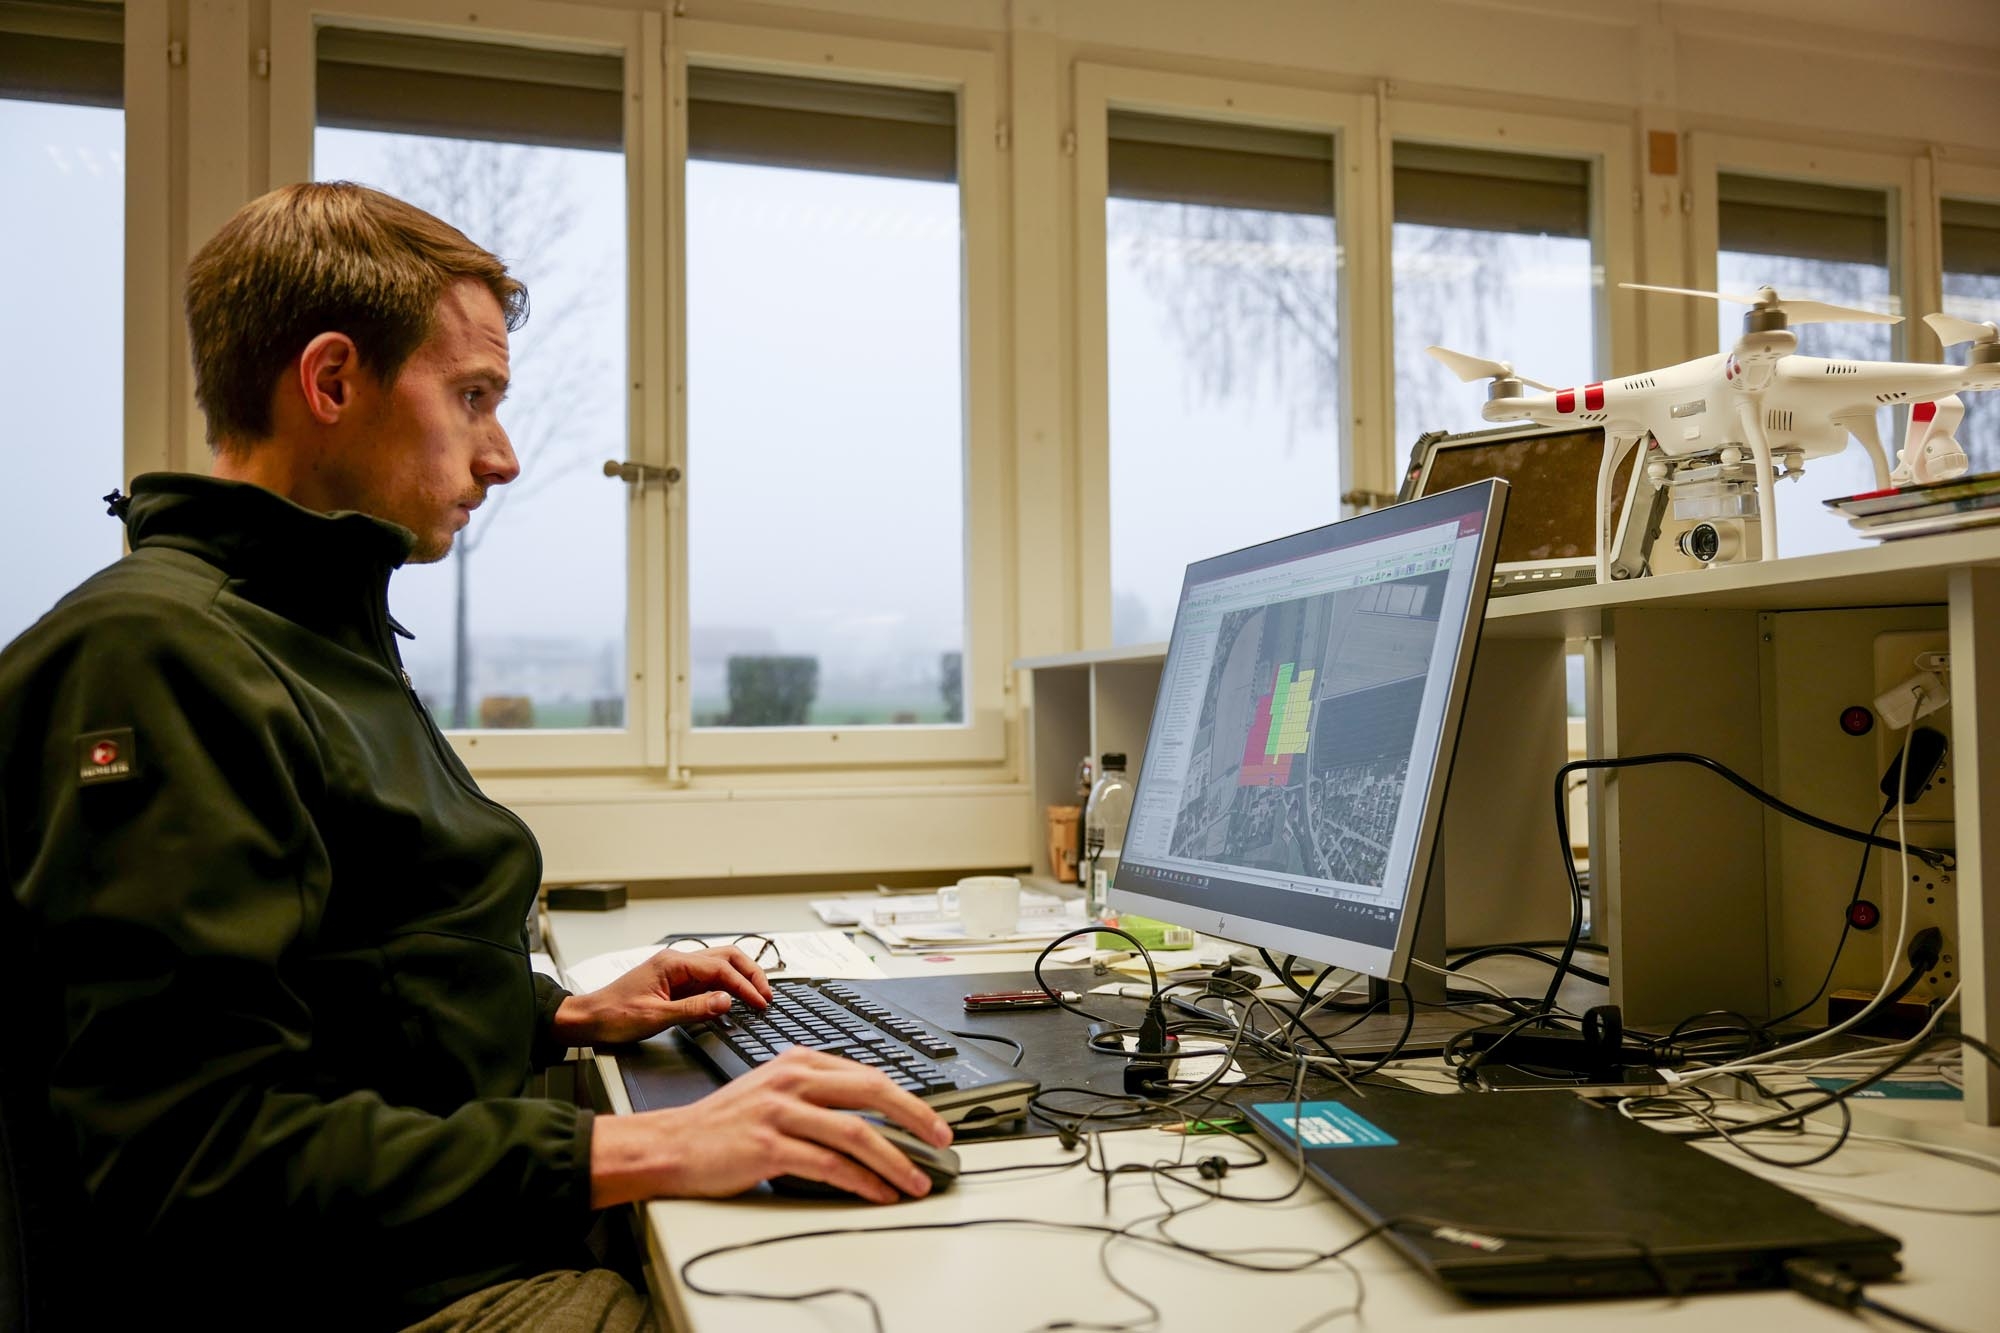 Each work order is first recorded by Florian Abt in the Farm Management Information System.